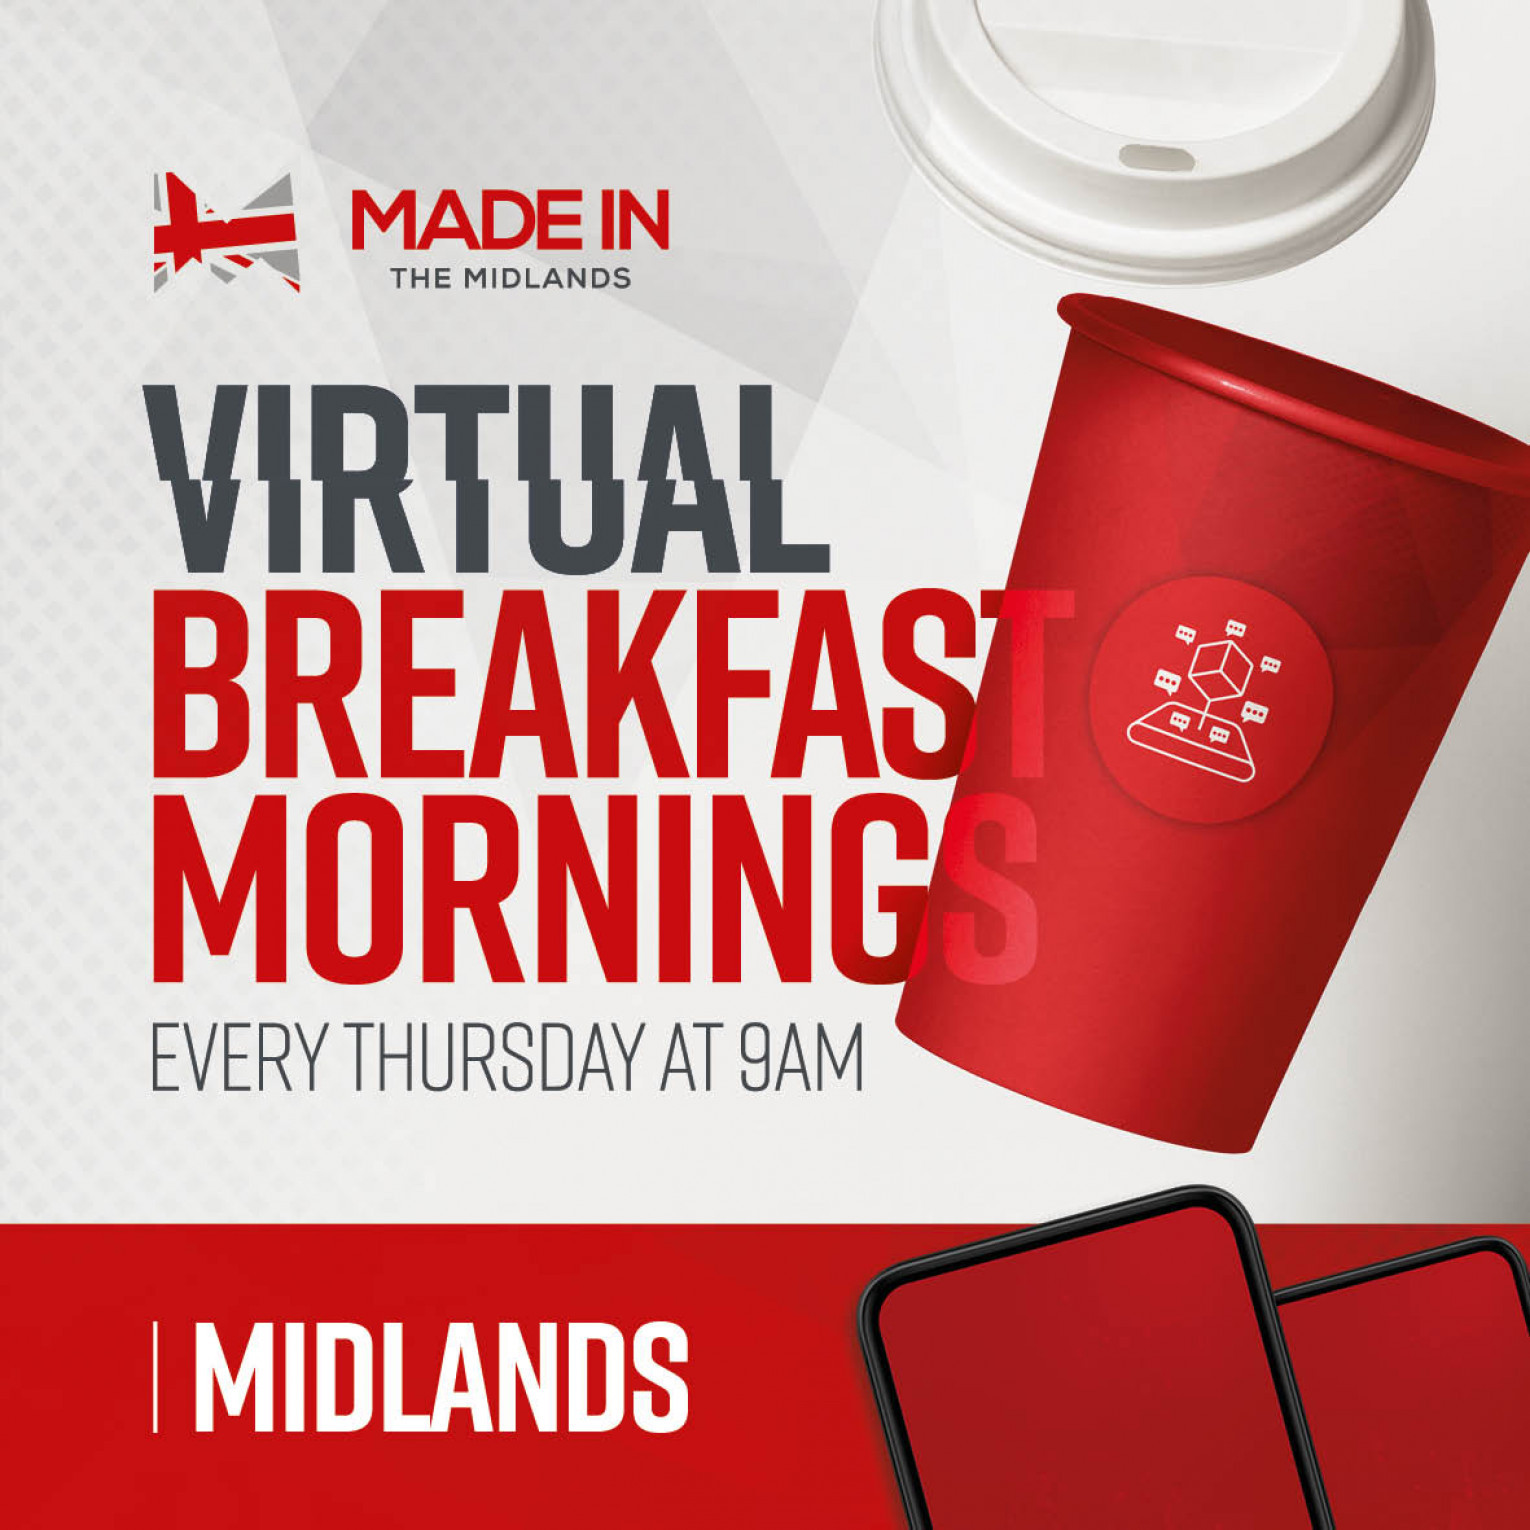 Made in the Midlands Virtual Breakfast Morning with Carrs Toolsteel Technologies